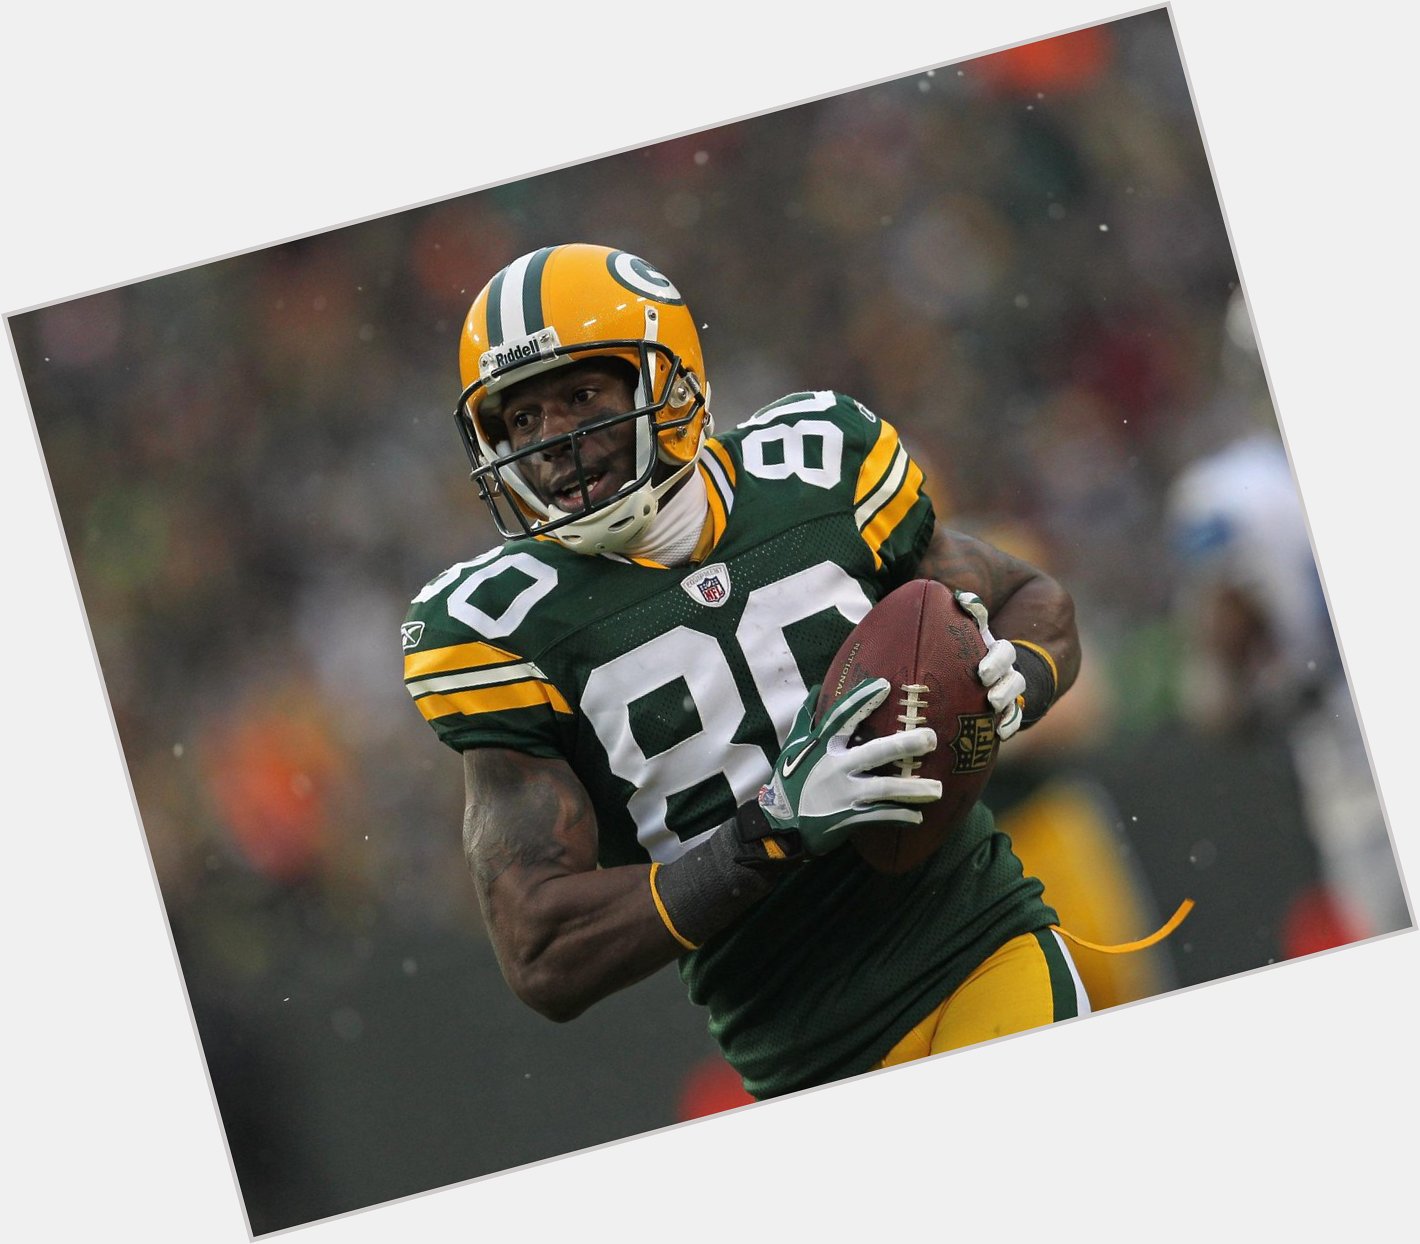 Happy Birthday to Donald Driver, who turns 40 today! 